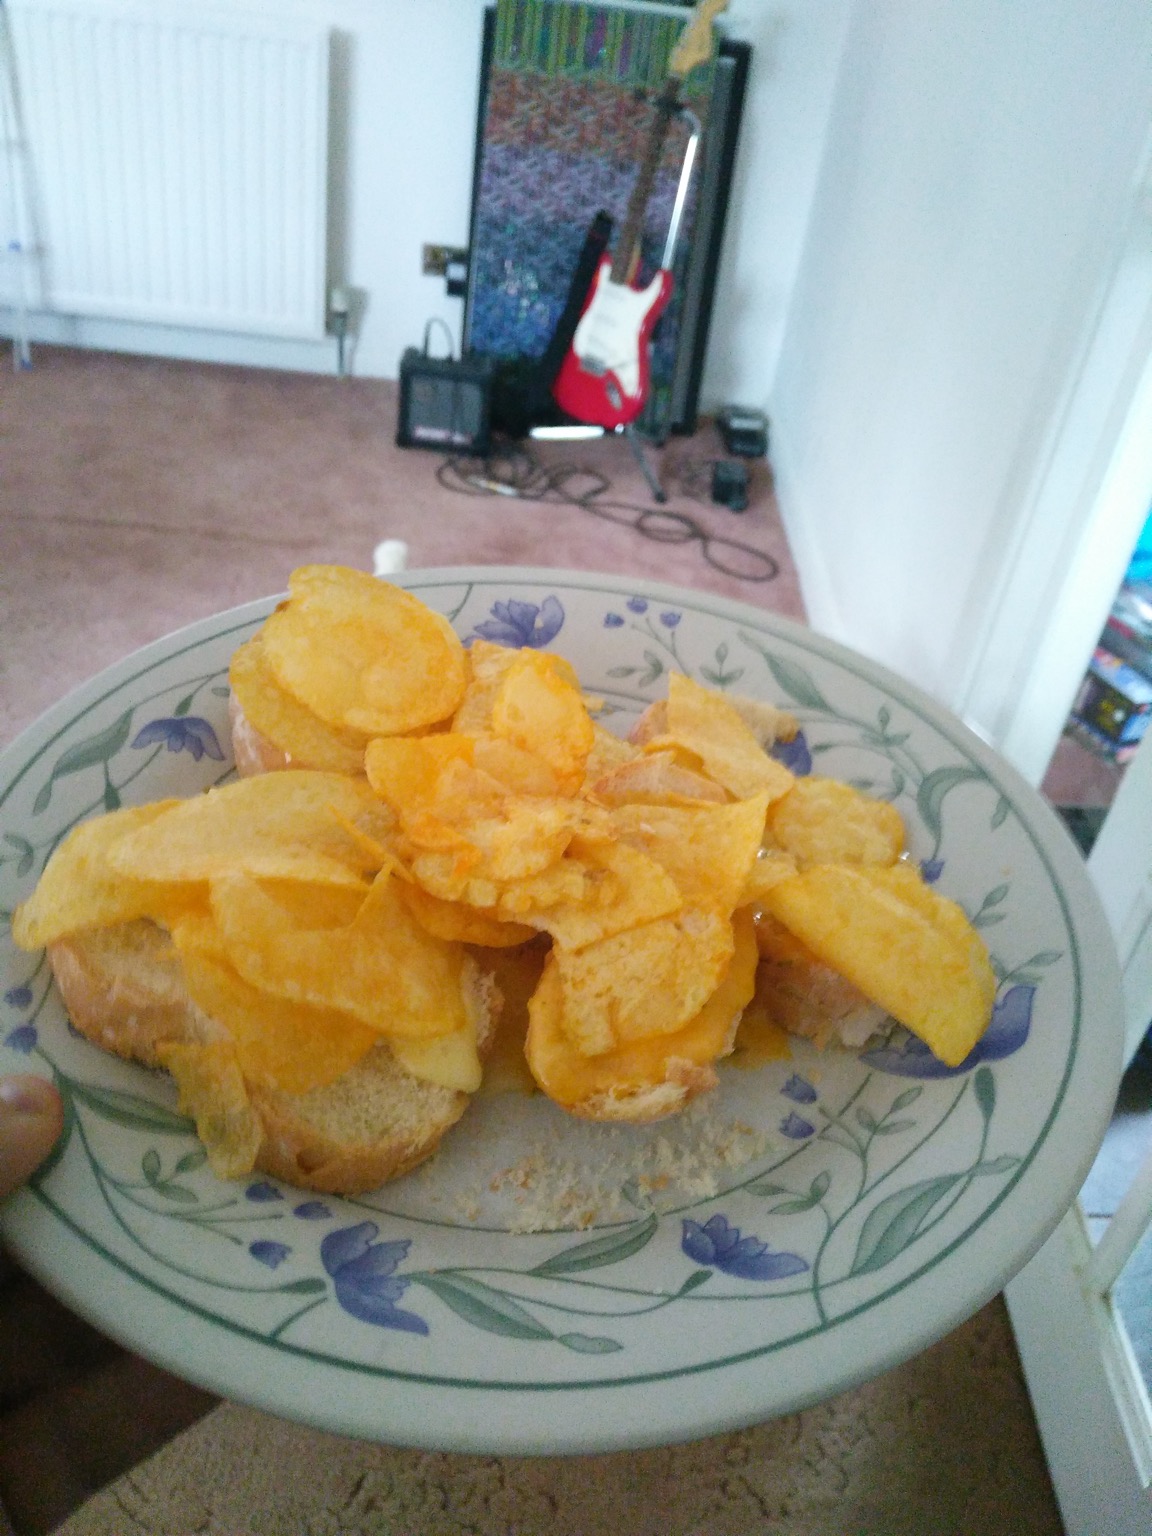 Crisps on white bread approaching a guitar